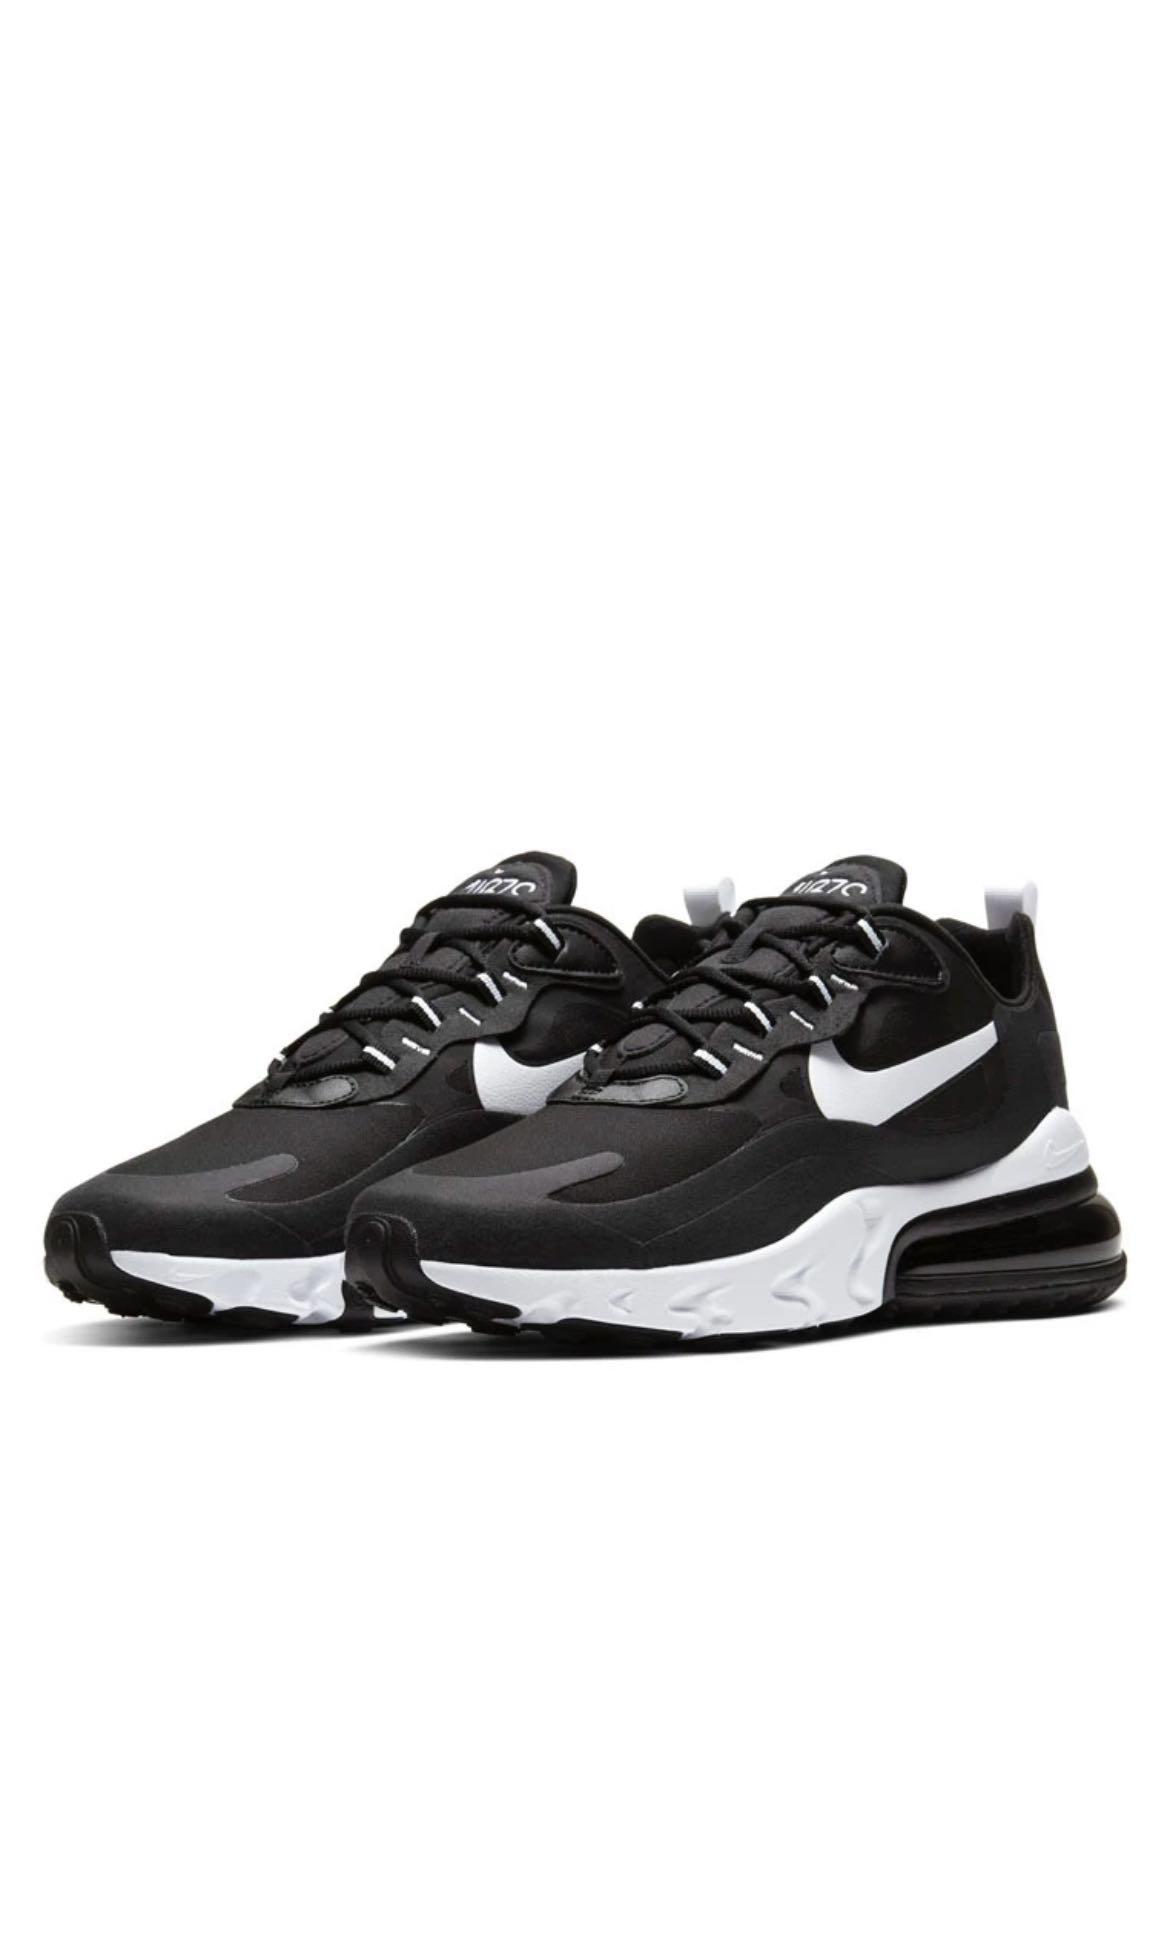 eindpunt ze lucht Nike Air Max 270 React Max, Men's Fashion, Footwear, Sneakers on Carousell